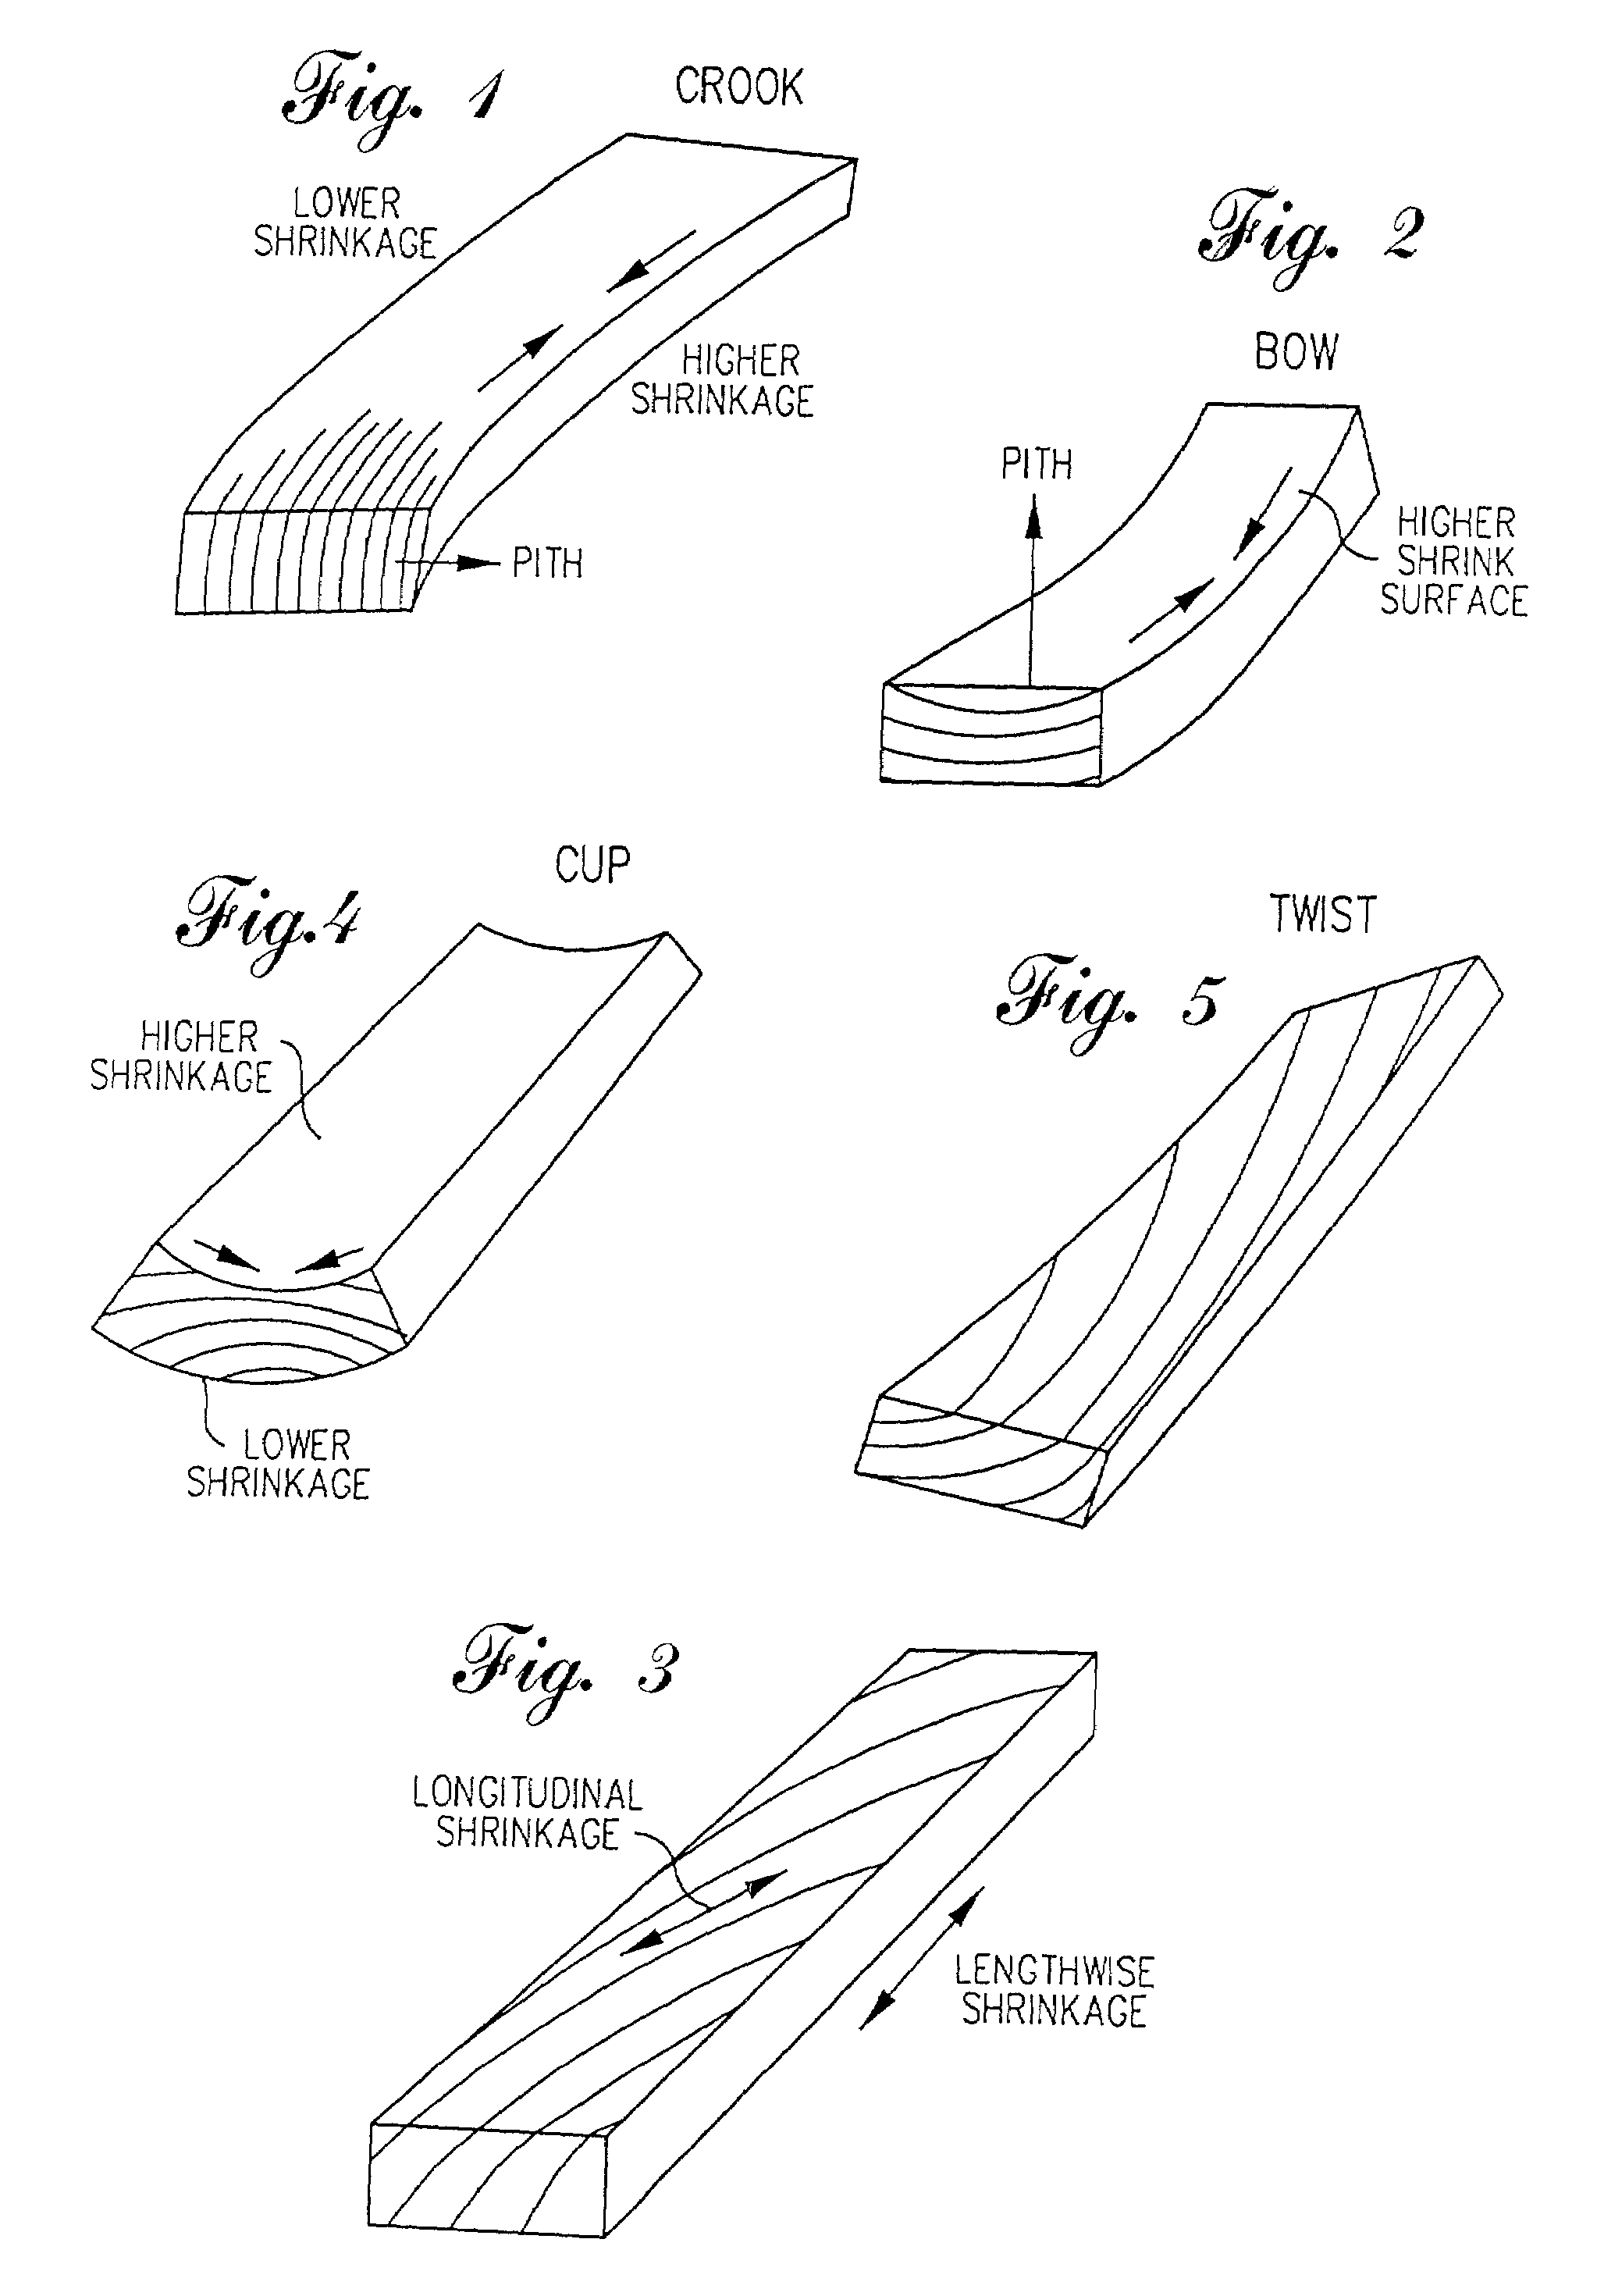 Method of evaluating logs to predict properties of lumber or veneer produced from the logs